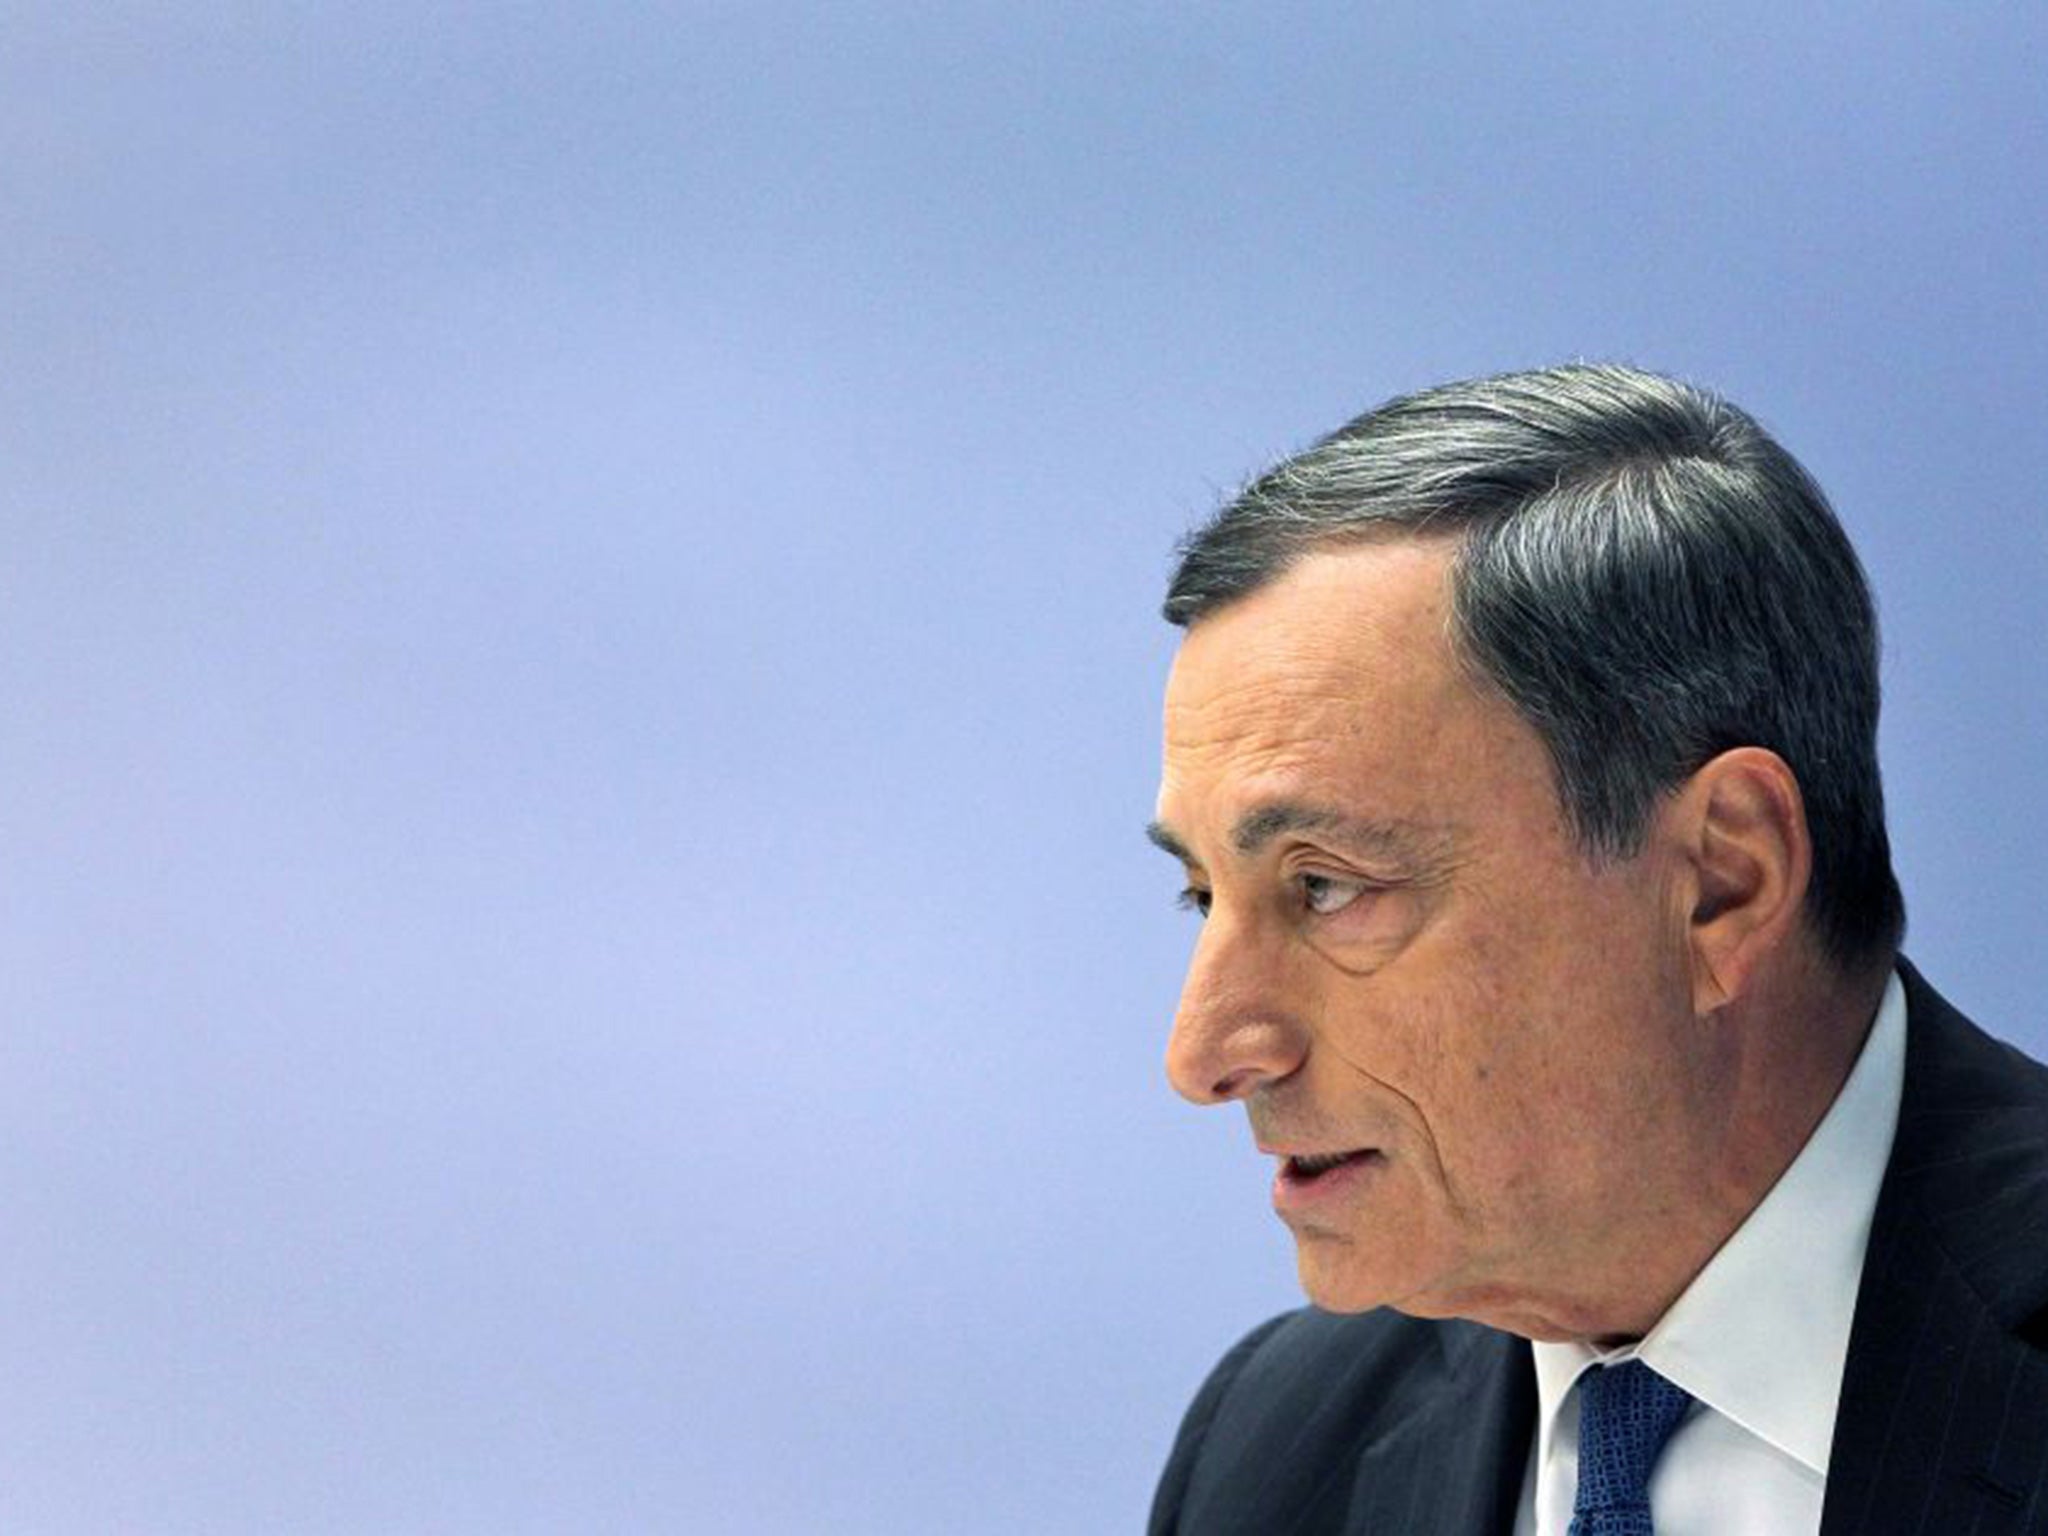 Mario Draghi has promised he will do what it takes to pull Europe out of deflation